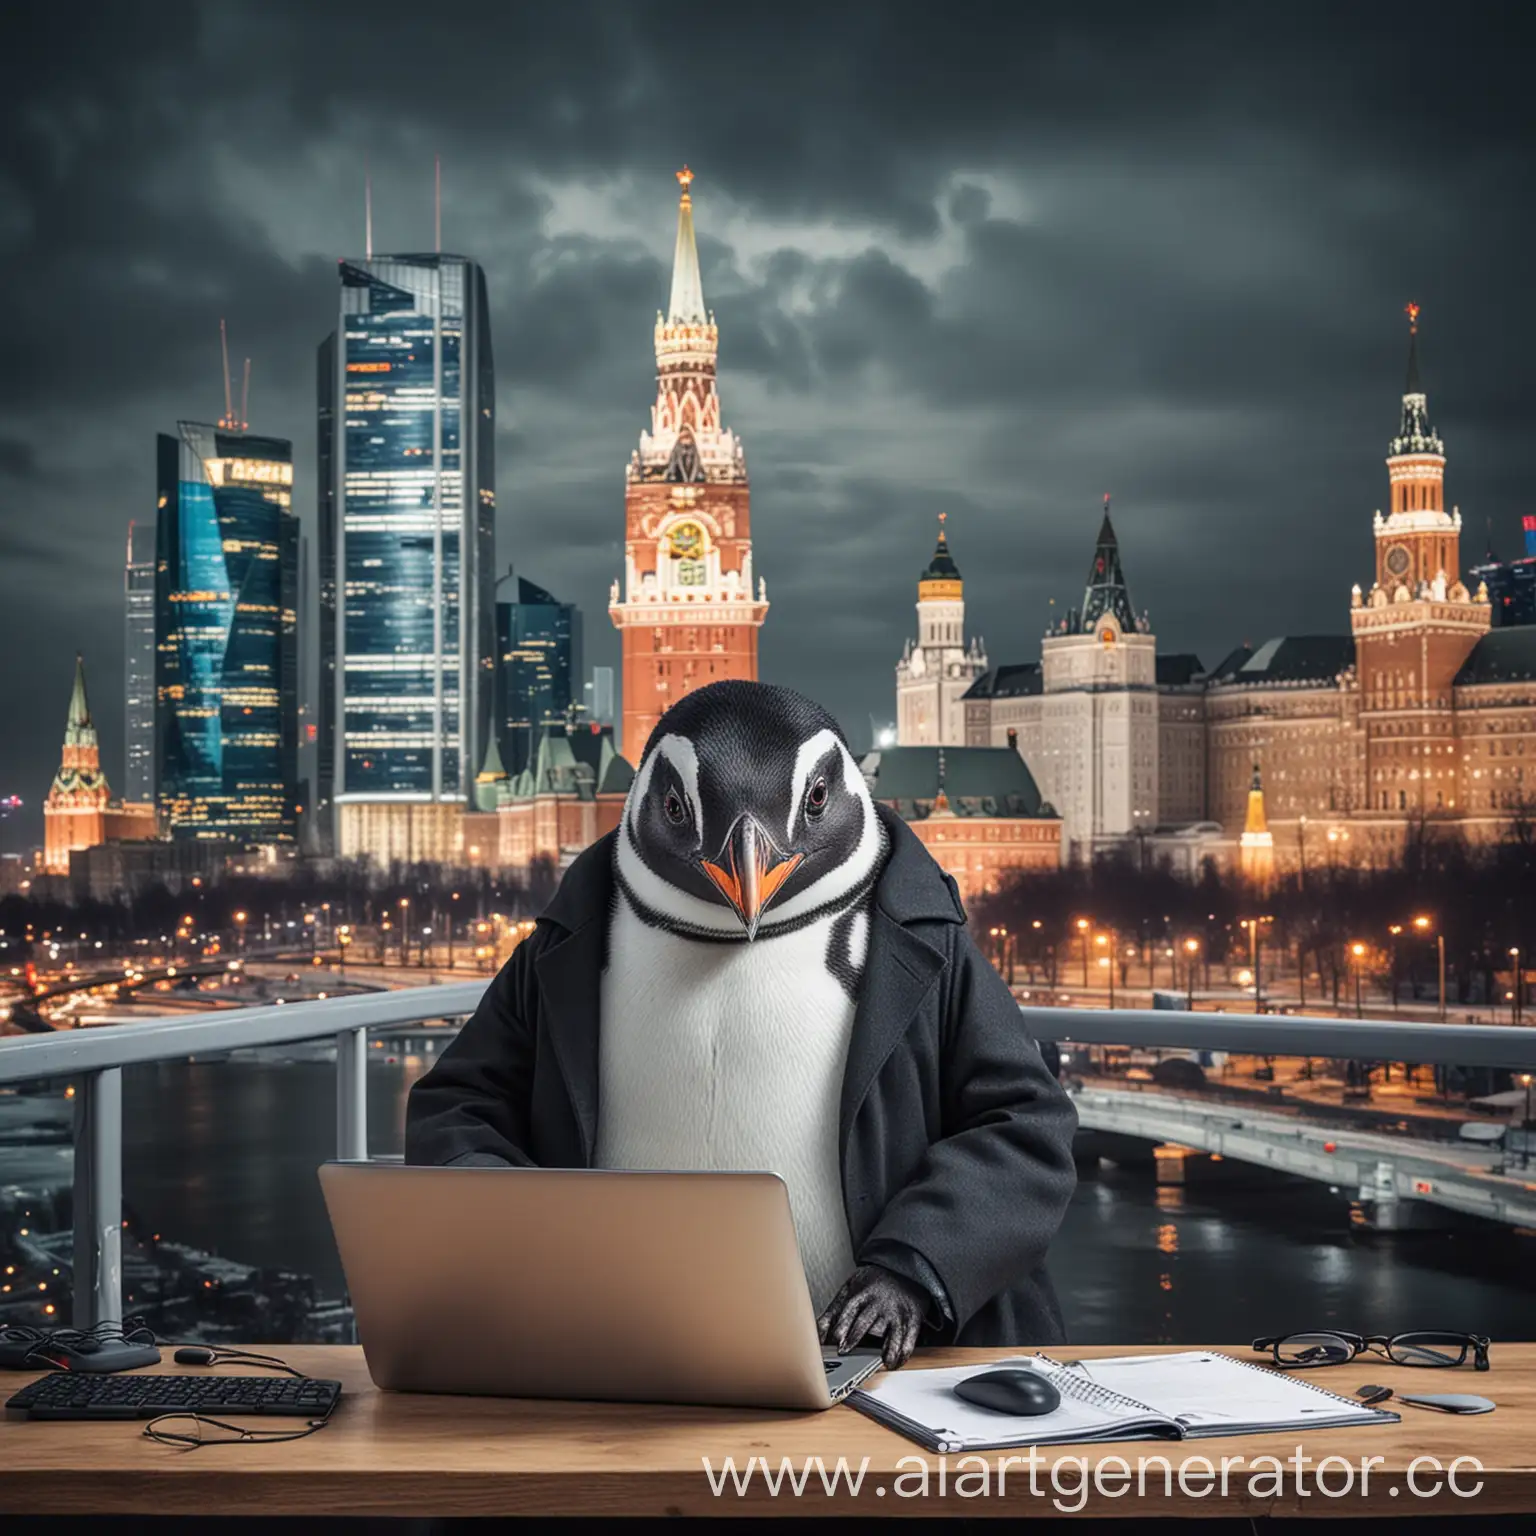 Penguin-Programmer-Working-in-Moscow-Office-with-Laptop-View